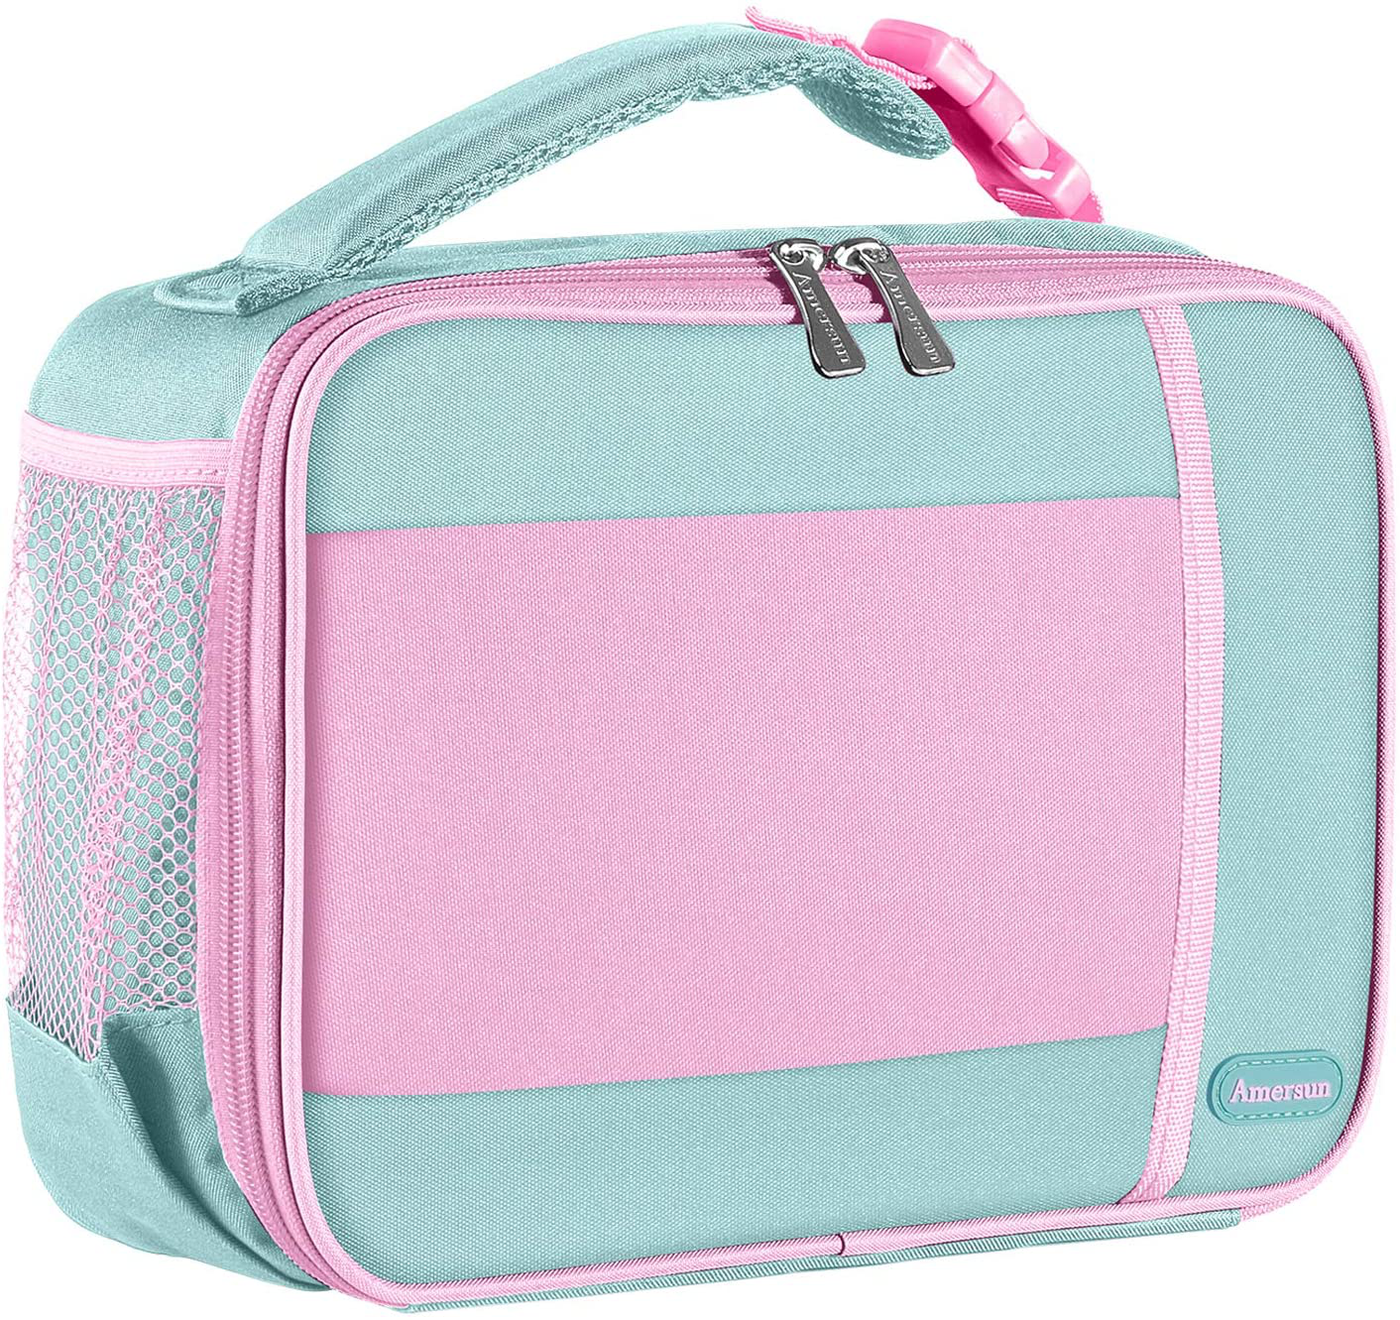 Kids Lunch Box with Supper Padded Inner Keep Food Cold Warm for Longer Time,Amersun Leak-proof Solid Insulated School Lunch Bag with Multi-Pocket for Teen Boys Girls,CPC Certified,Dinosaur